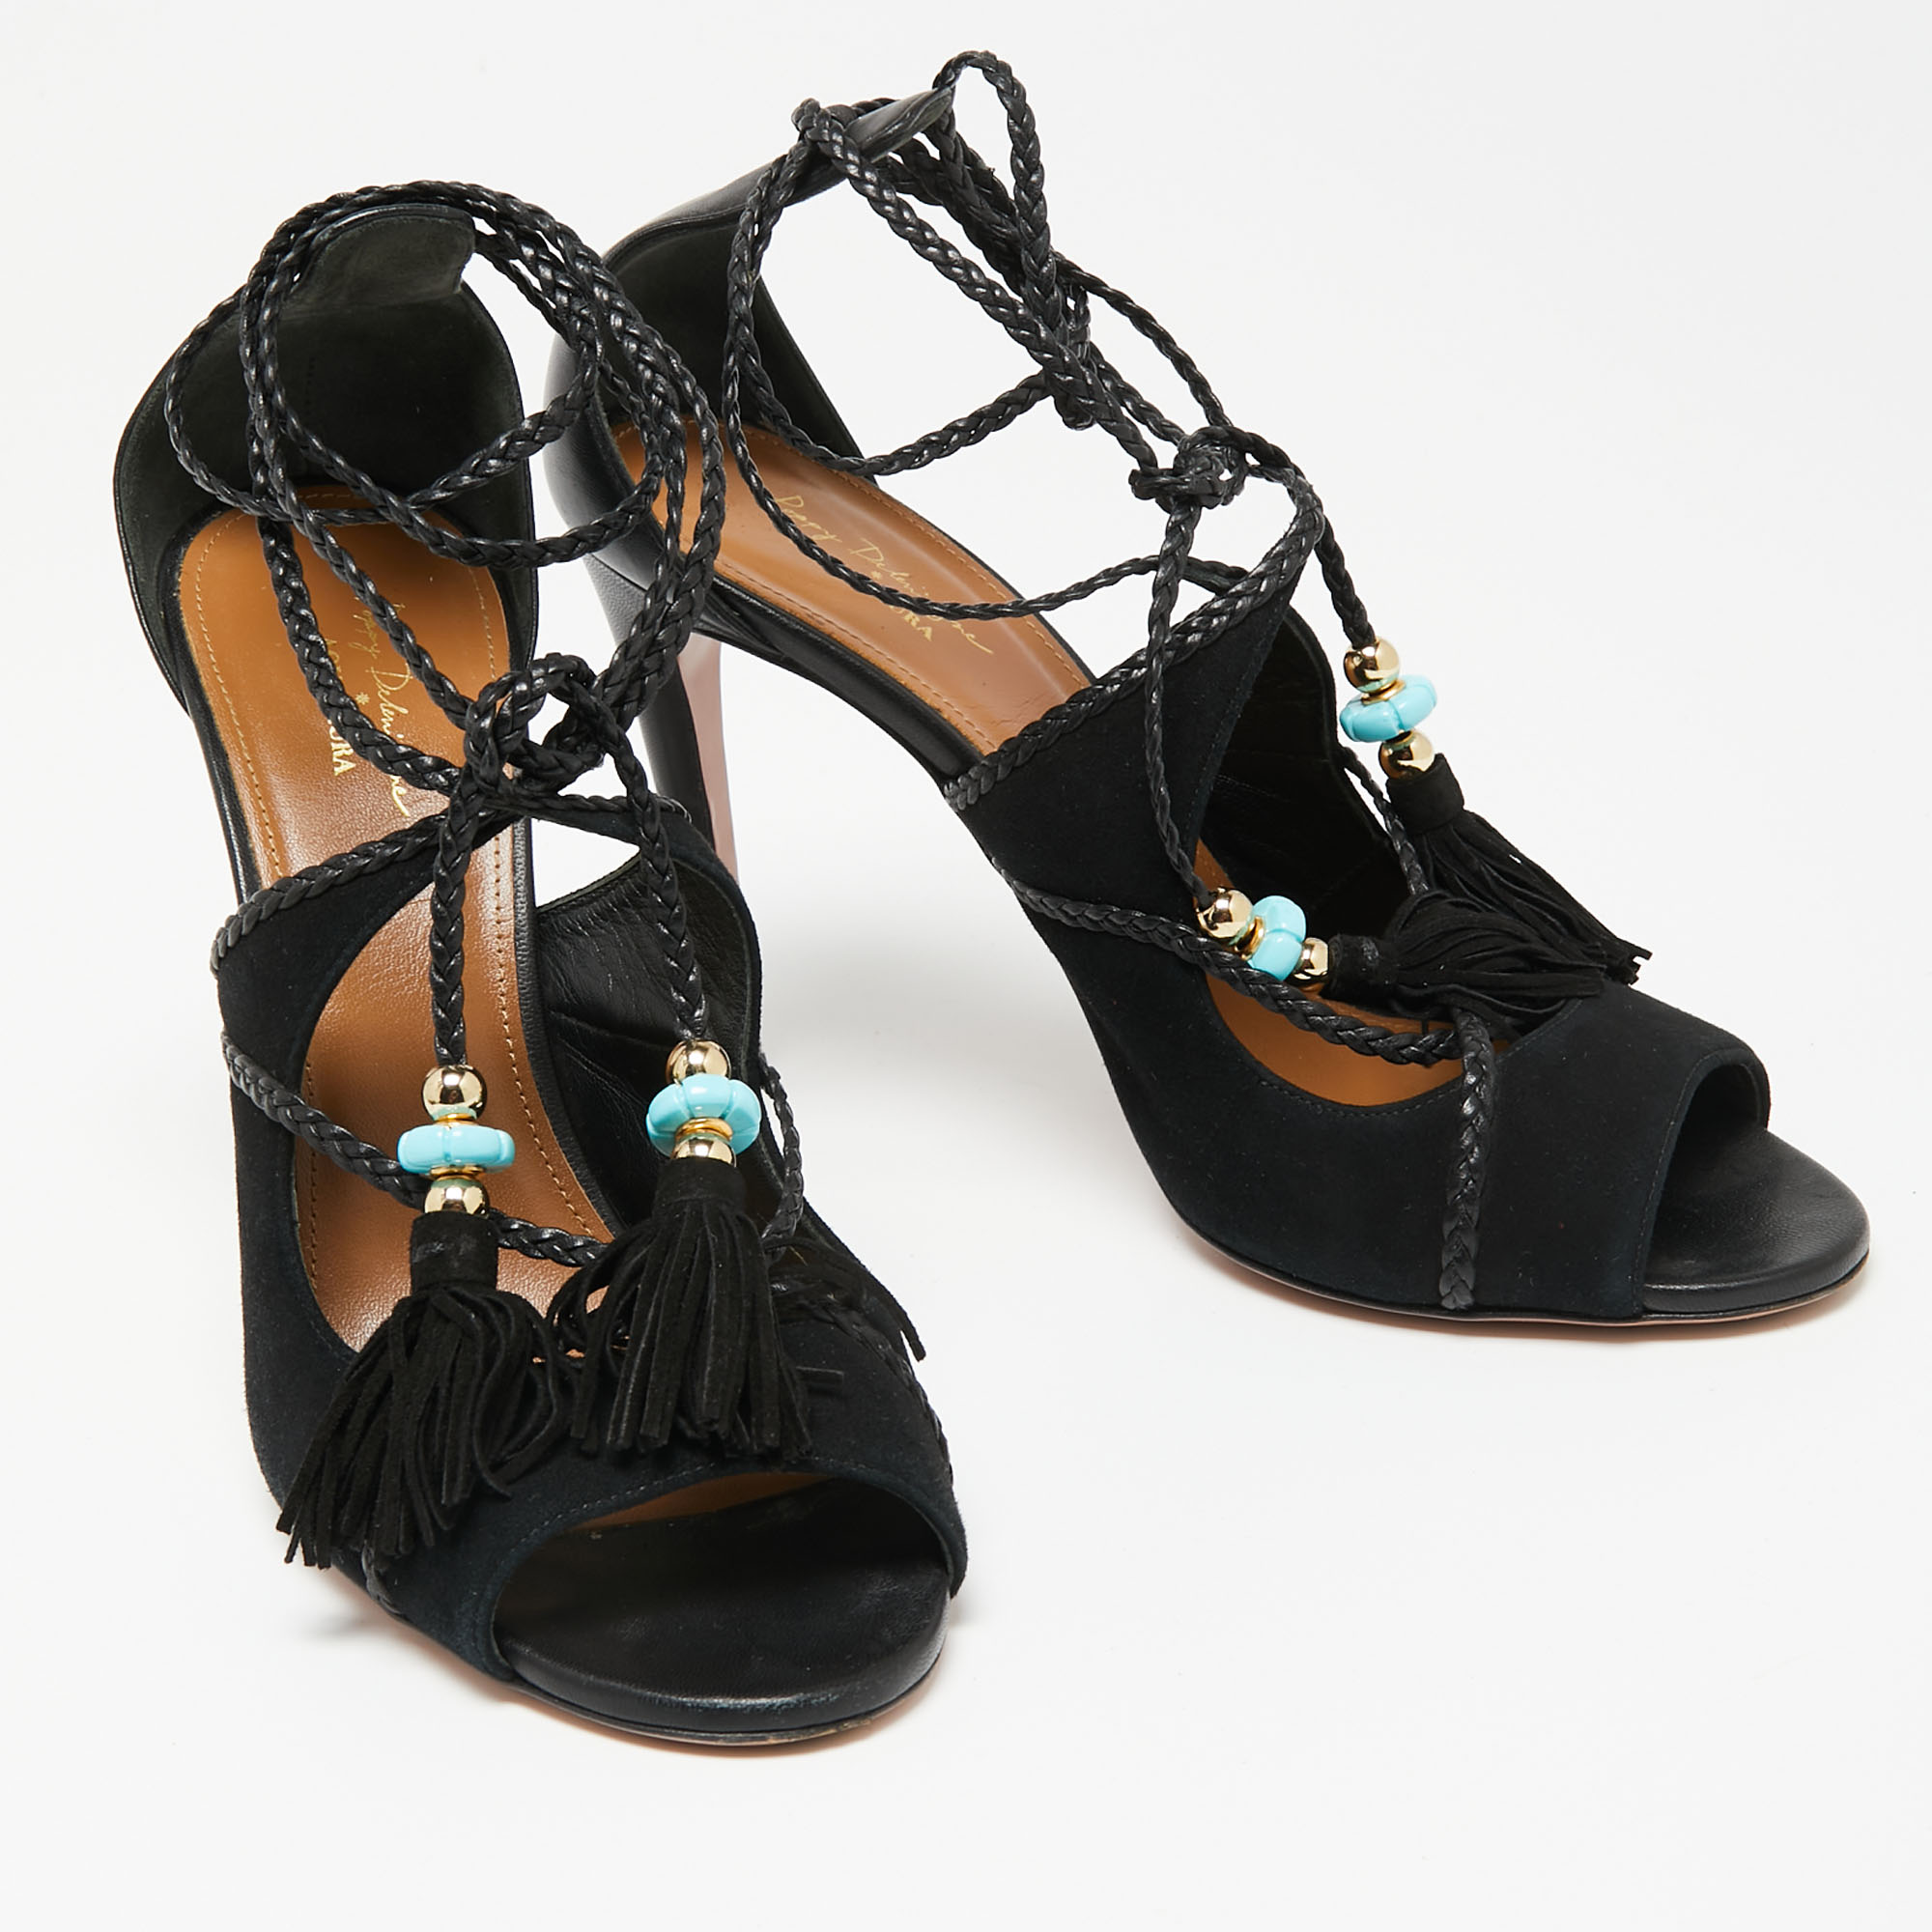 Aquazzura  Black Suede And Leather Open Toe Ankle Wrap  Sandals Size 41